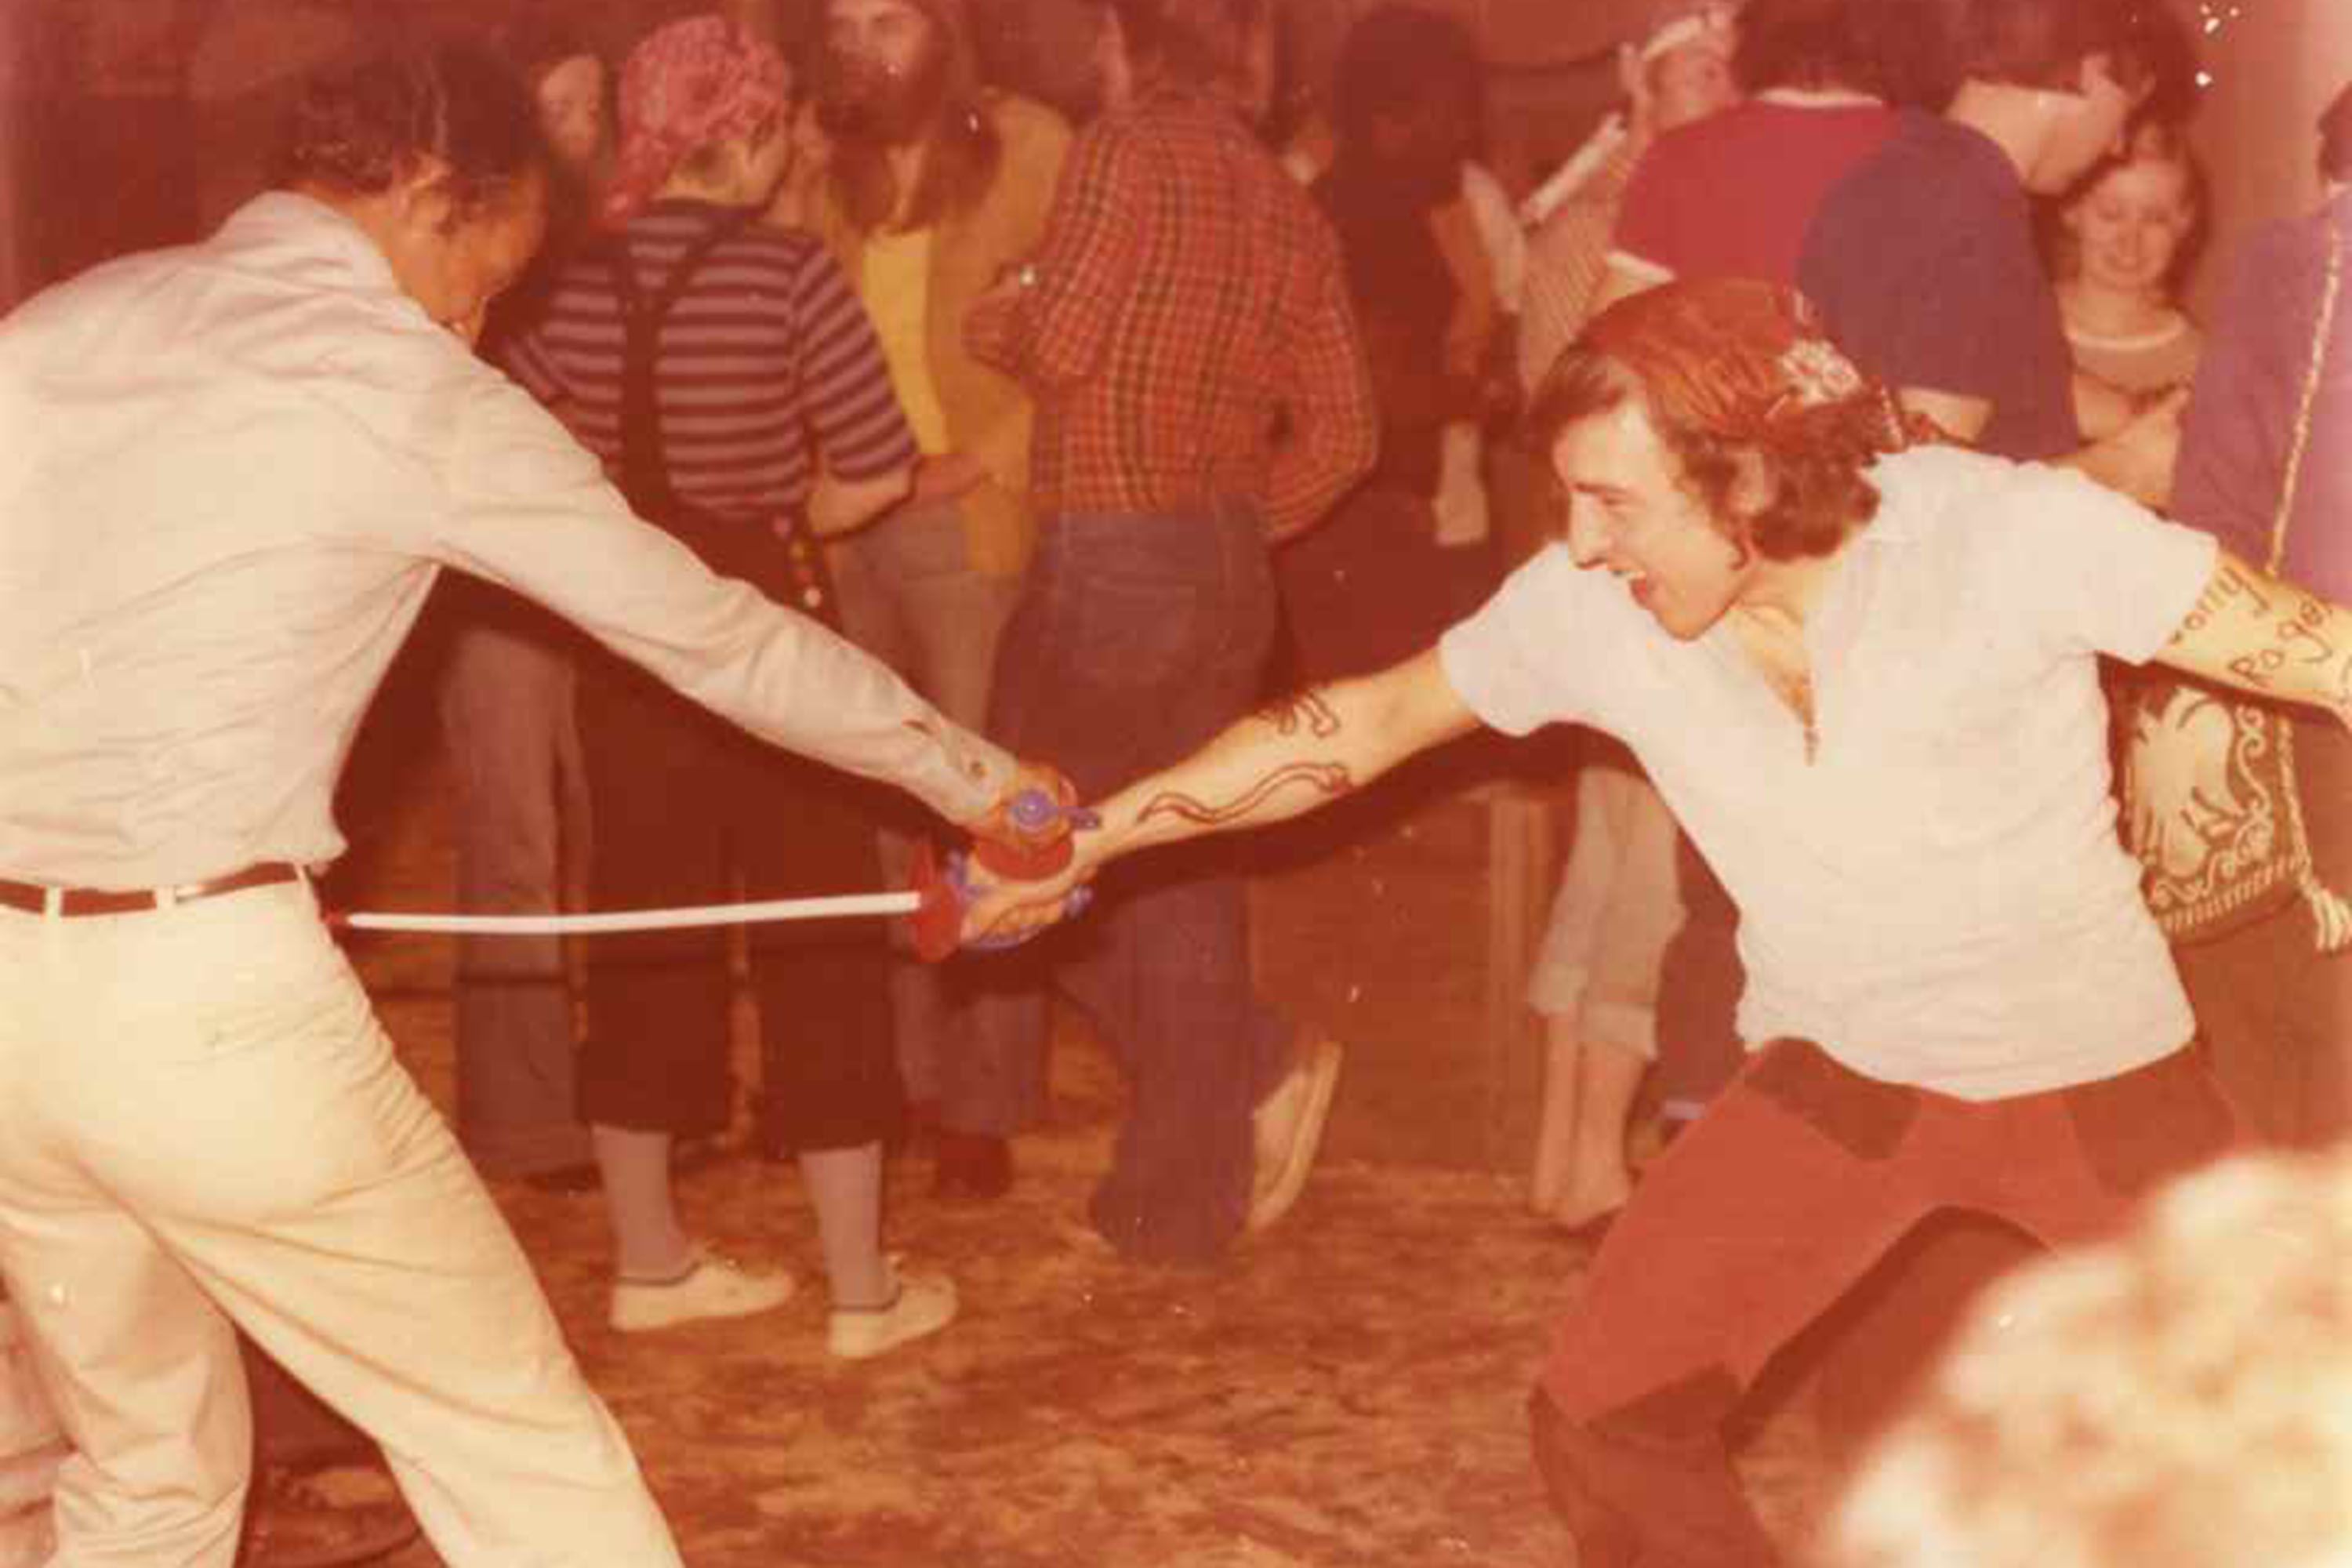 Dr Martin Alcock at a pirate party at Silwood Park in the 1970s